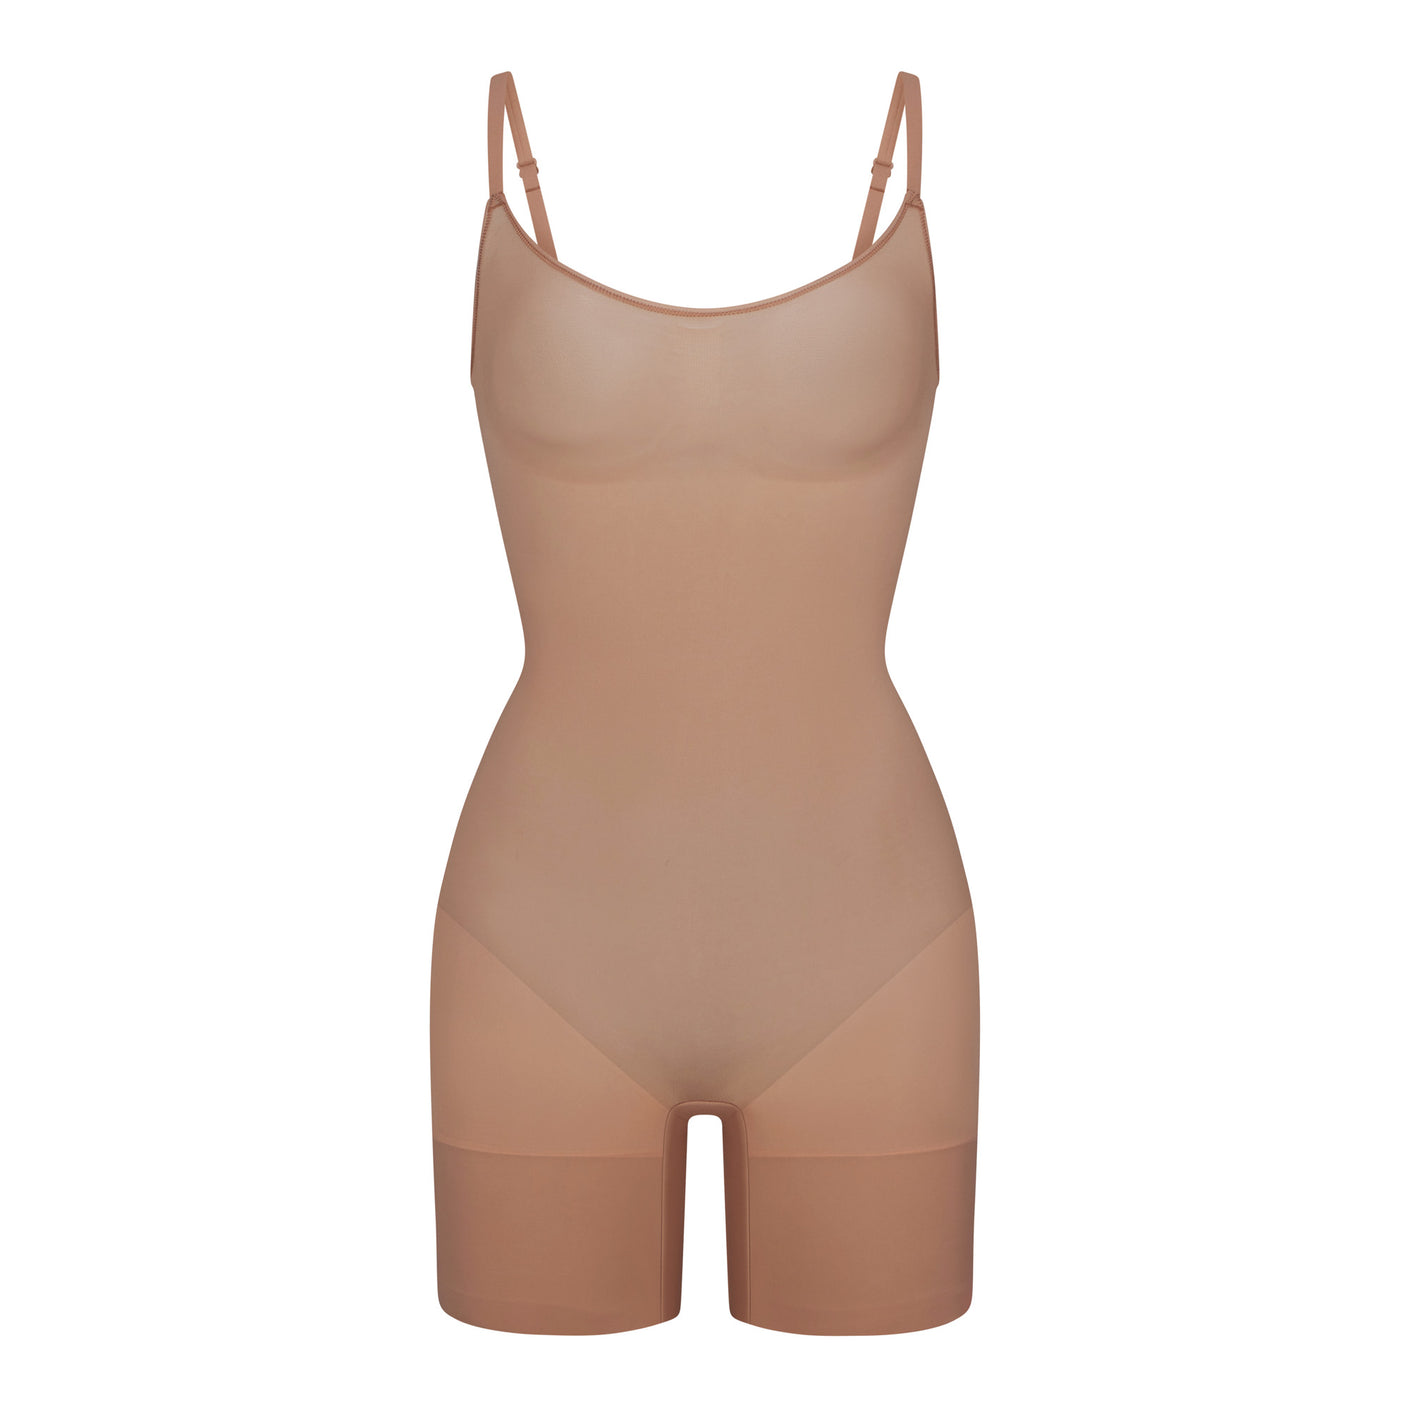 KimKardashian wears the (just replenished!) Sculpting Bodysuit in Sienna.  This everyday shapewear essential holds in your core, lifts yo